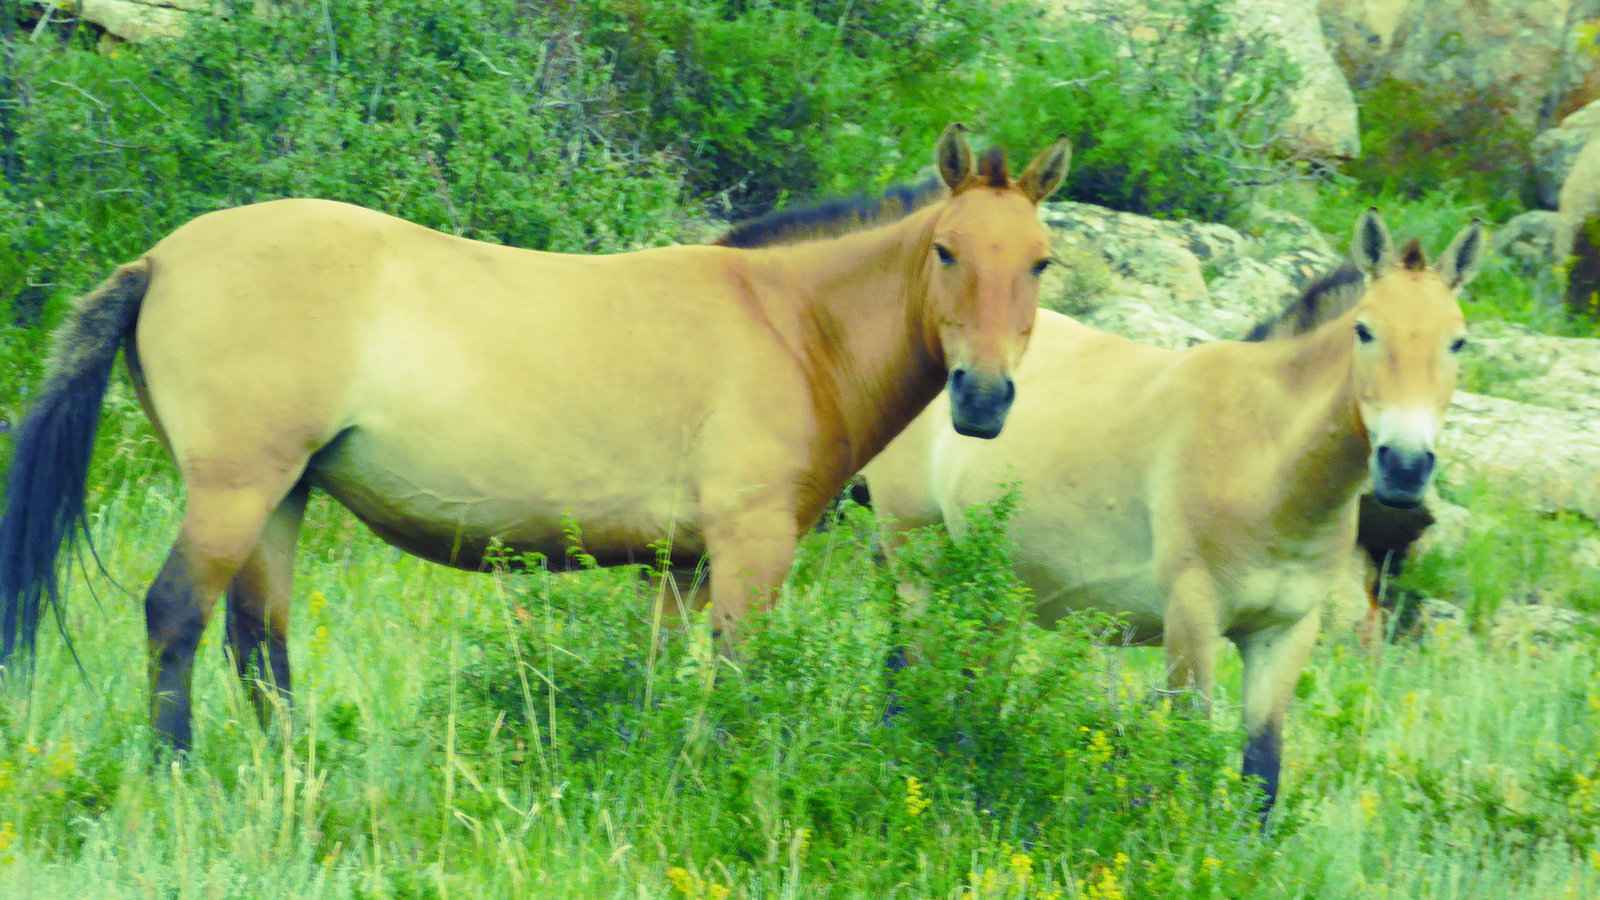 The takhi or Przewalski's horse from Mongolia is the only true wild horse species alive today